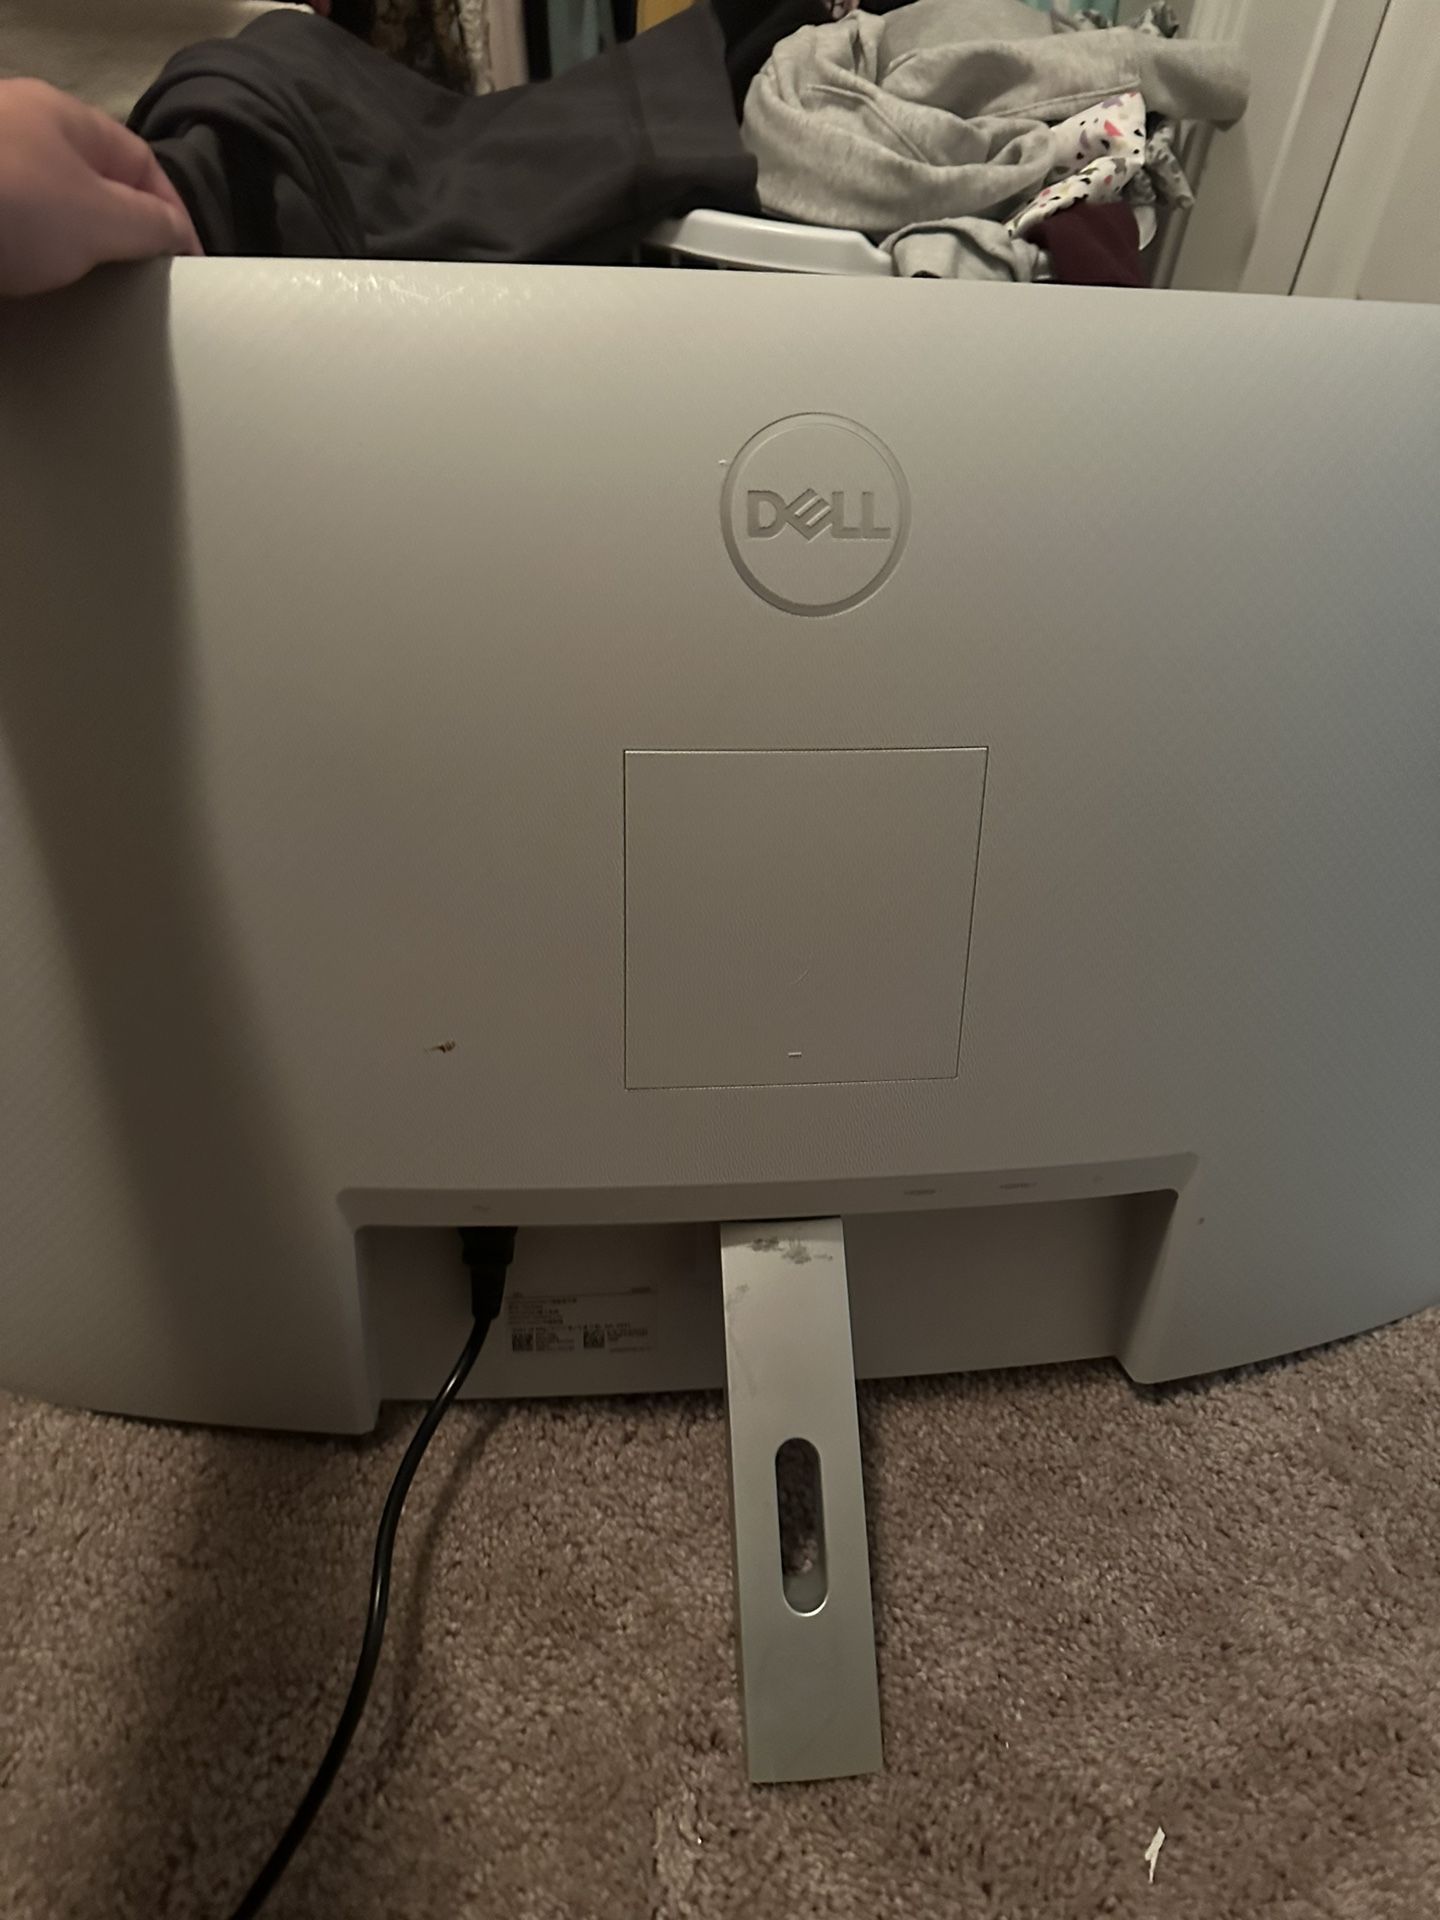 32-Inch Curved FHD dell Monitor 